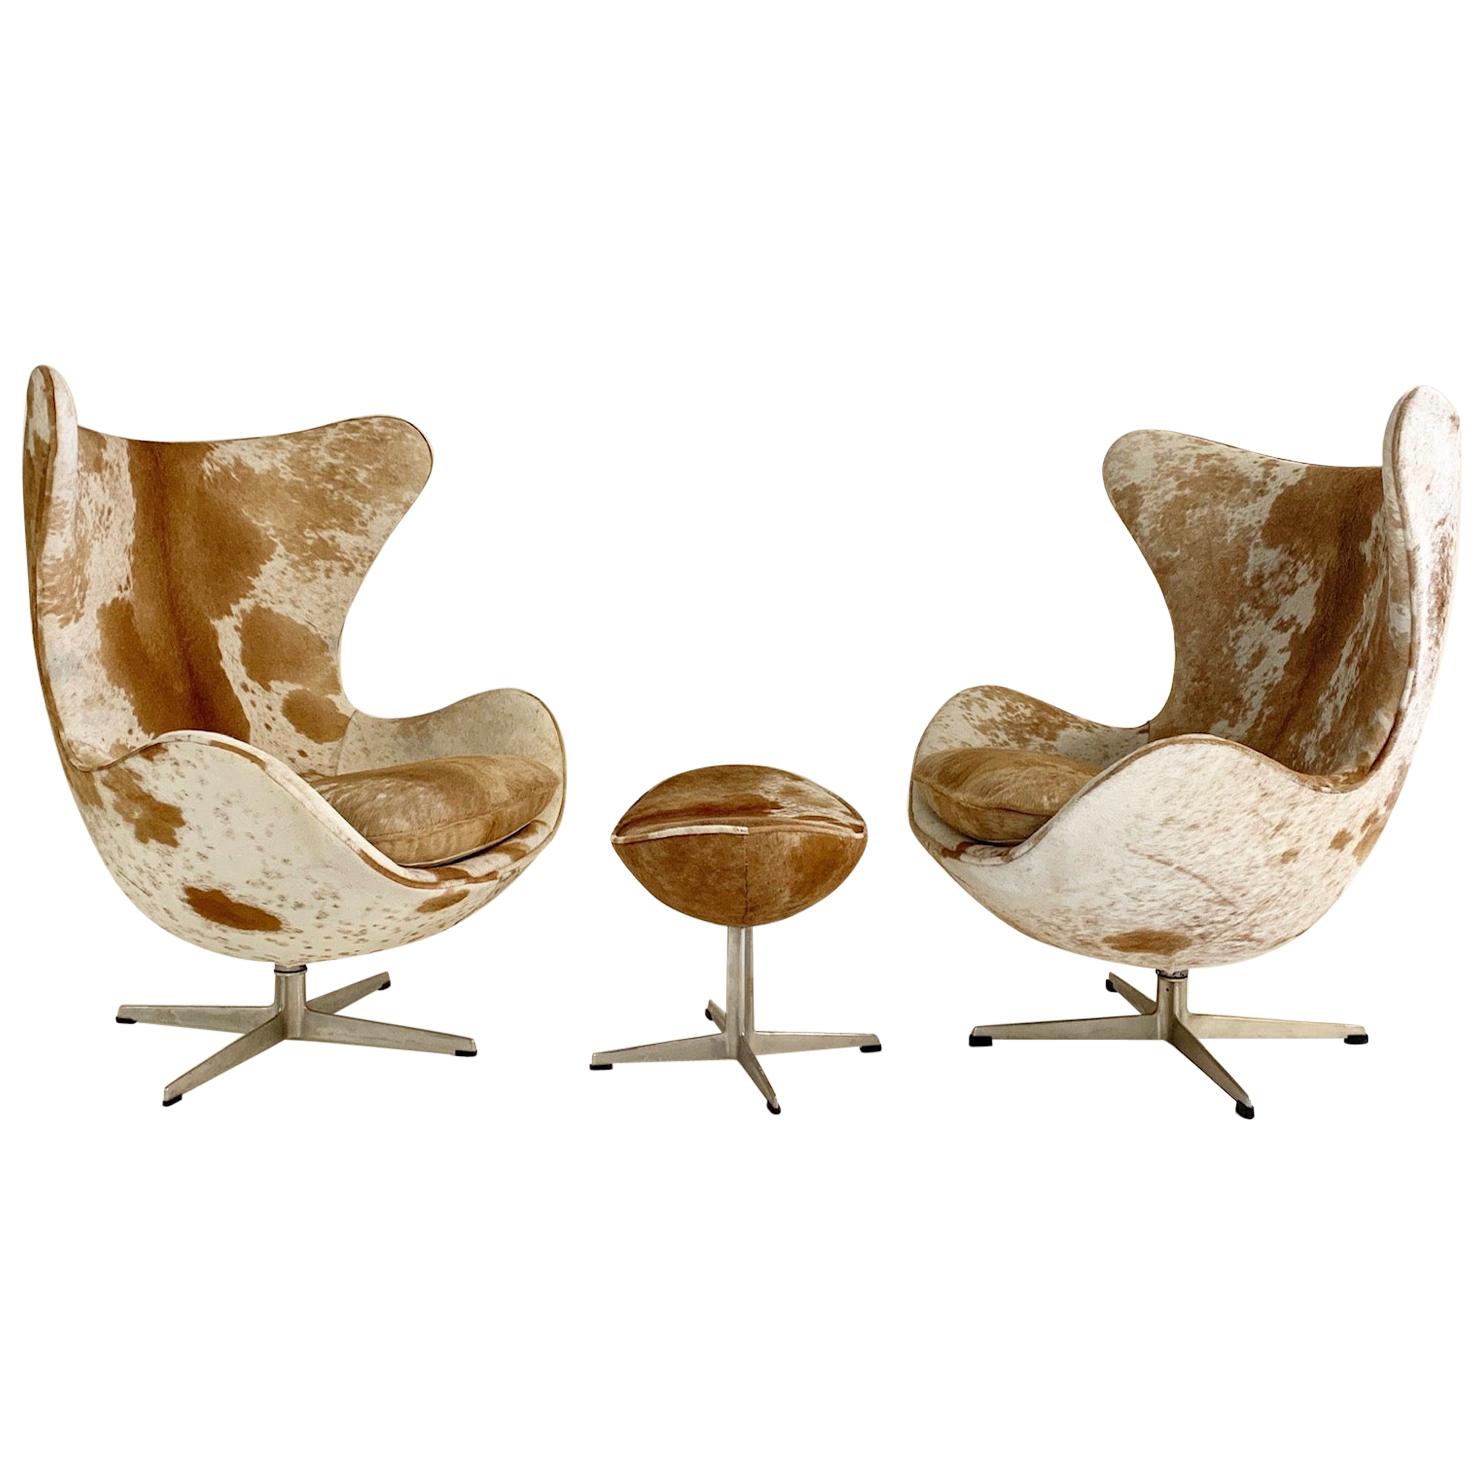 Arne Jacobsen Egg Chairs and Ottoman in Brazilian Cowhide